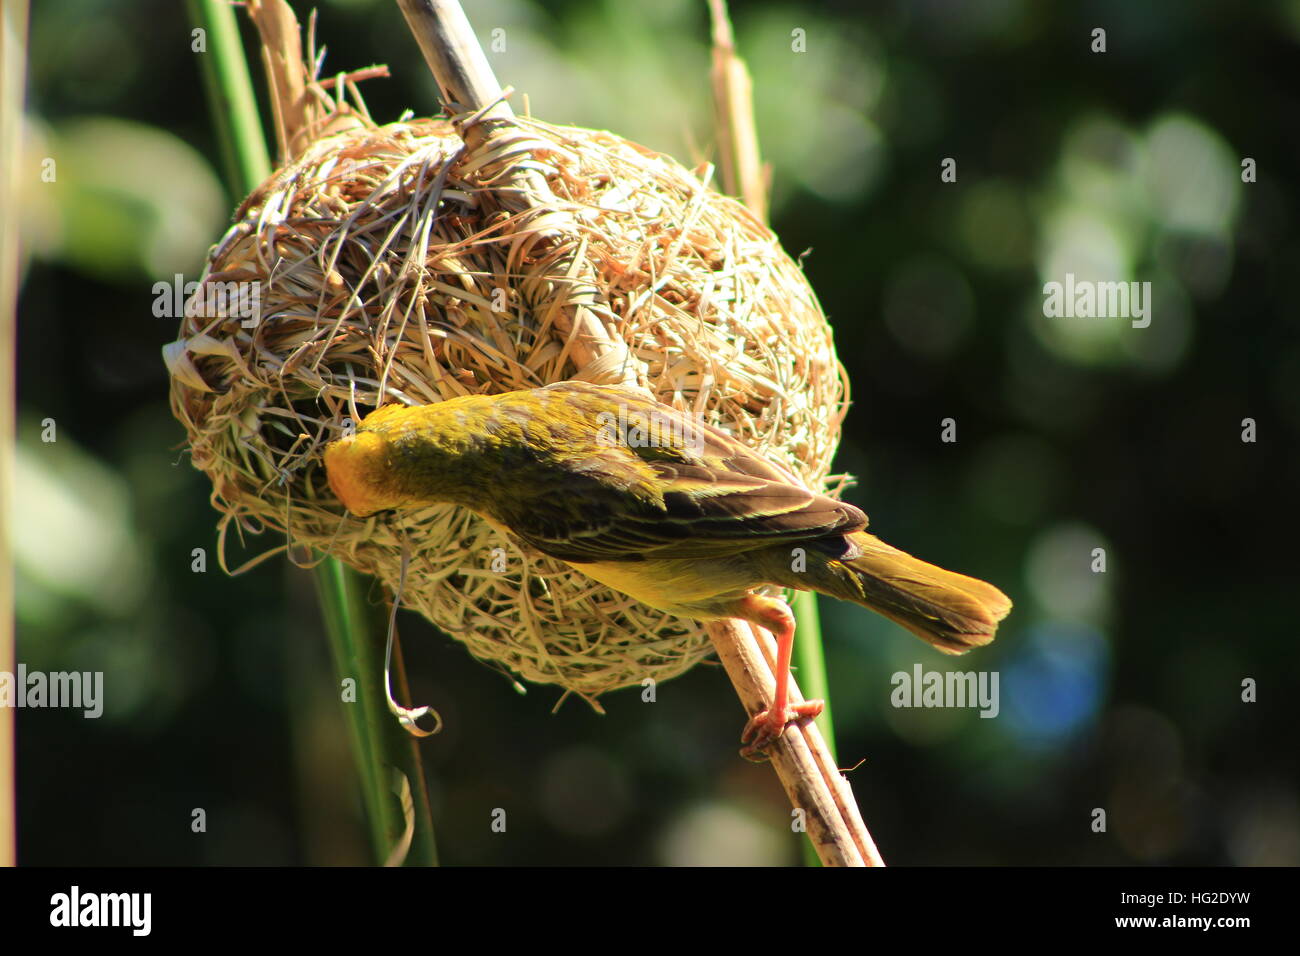 Southern African male Masked Weaver bird taking apart a nest. Stock Photo